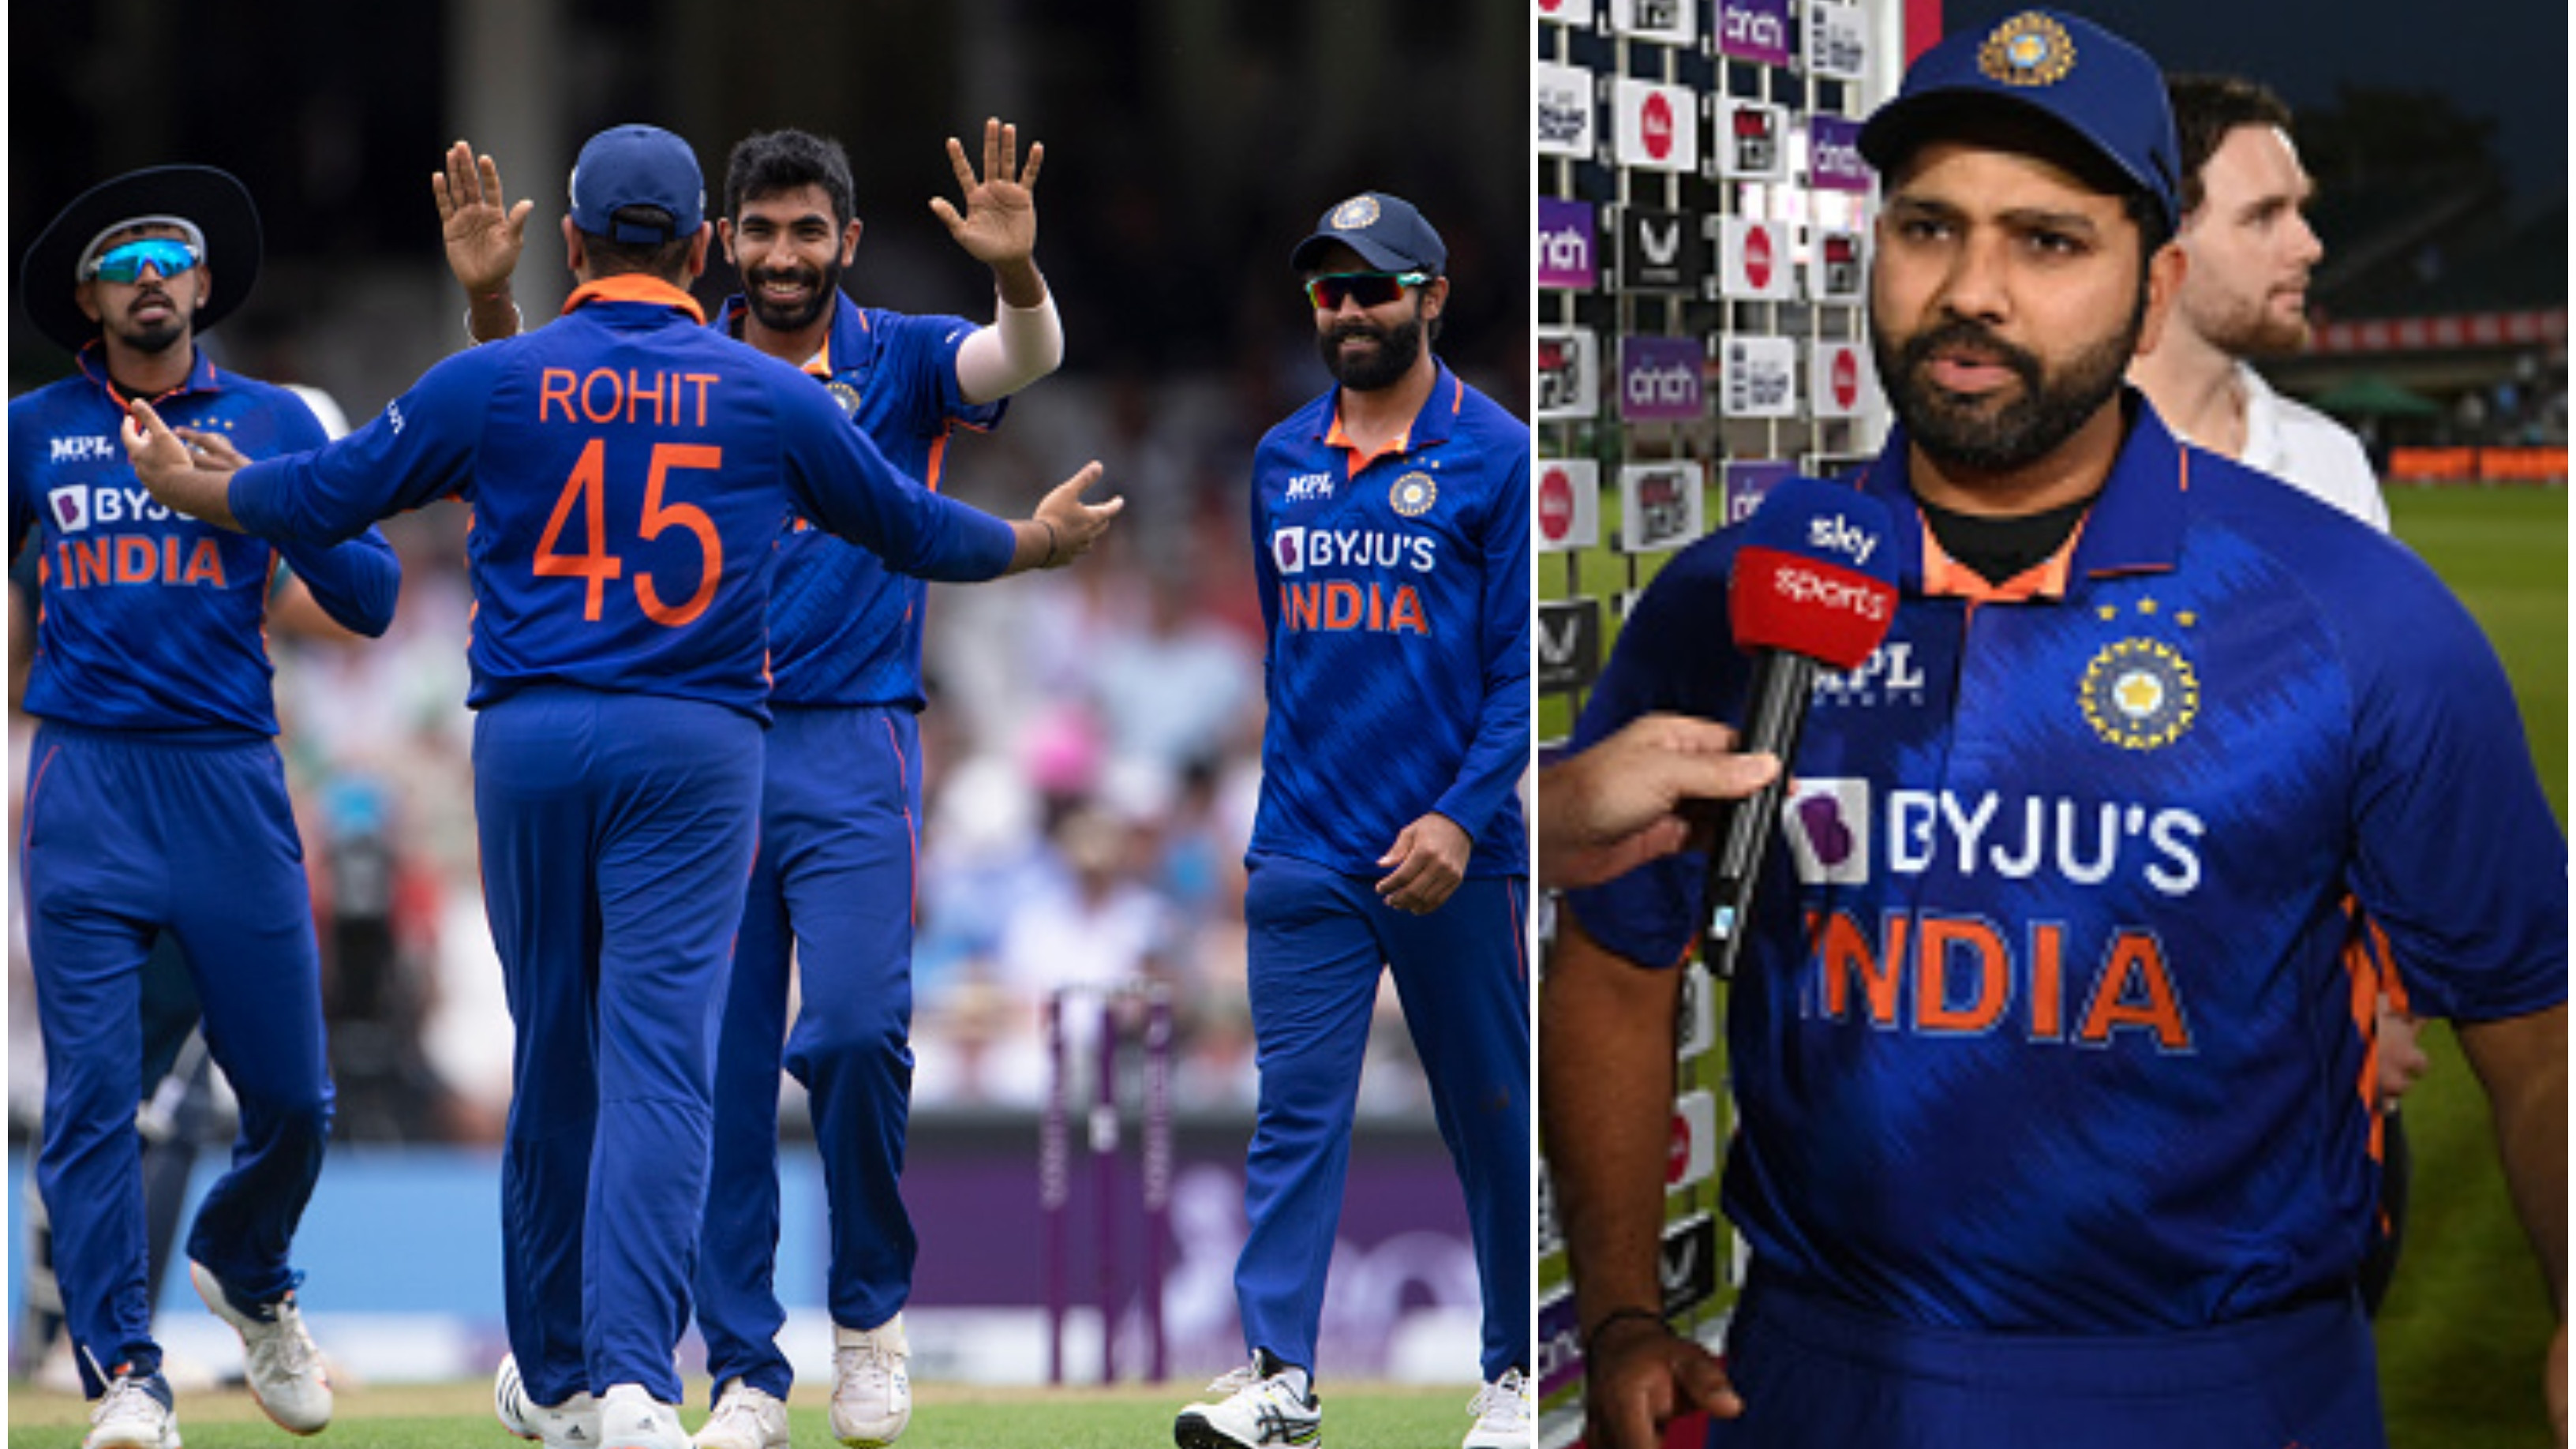 ENG v IND 2022: ‘We exploited the conditions well’, Rohit Sharma lauds his bowlers after 10-wicket win in 1st ODI